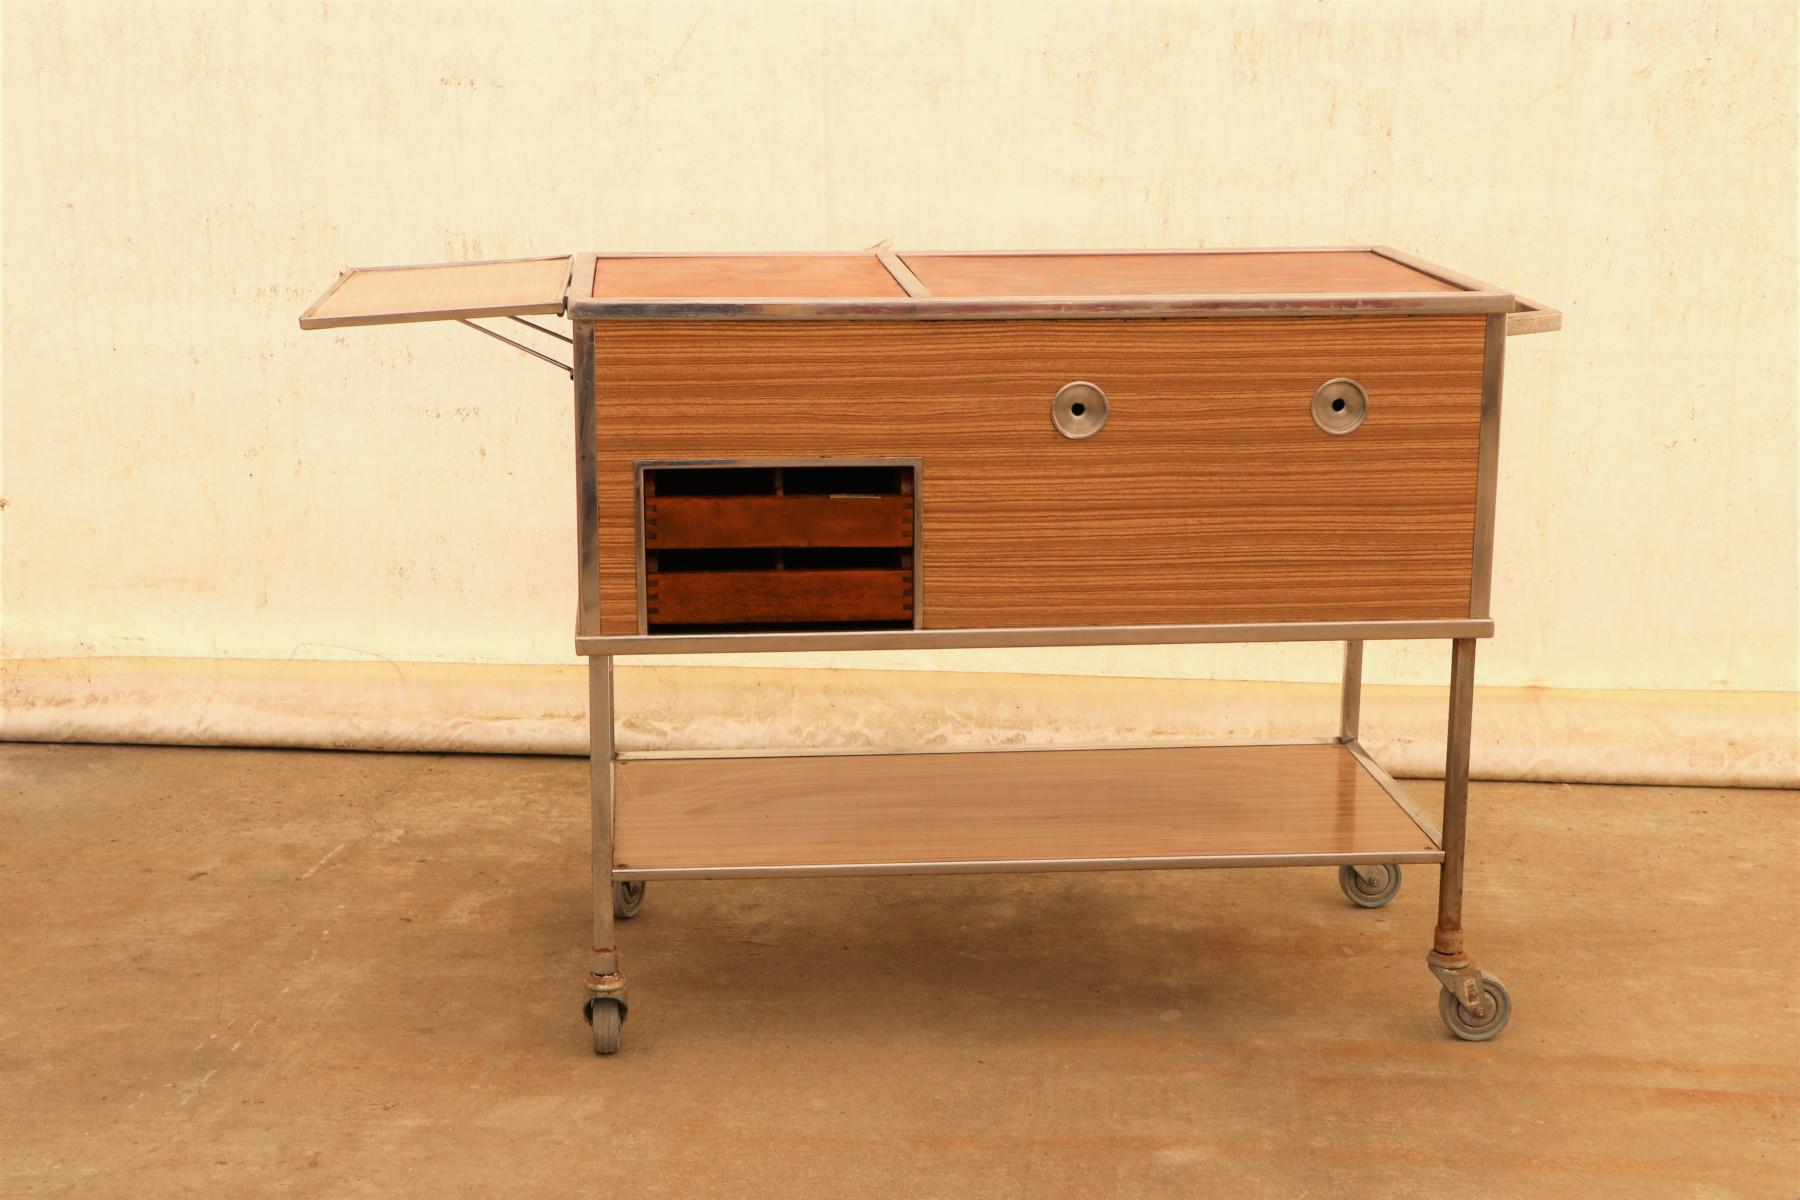 This Industrial-style serving trolley on wheels was made in the former Czechoslovakia in the 1970s. It was originally used as a serving table in the restaurant or hotel. At the moment, it is rather a great decoration for the interior.
It features